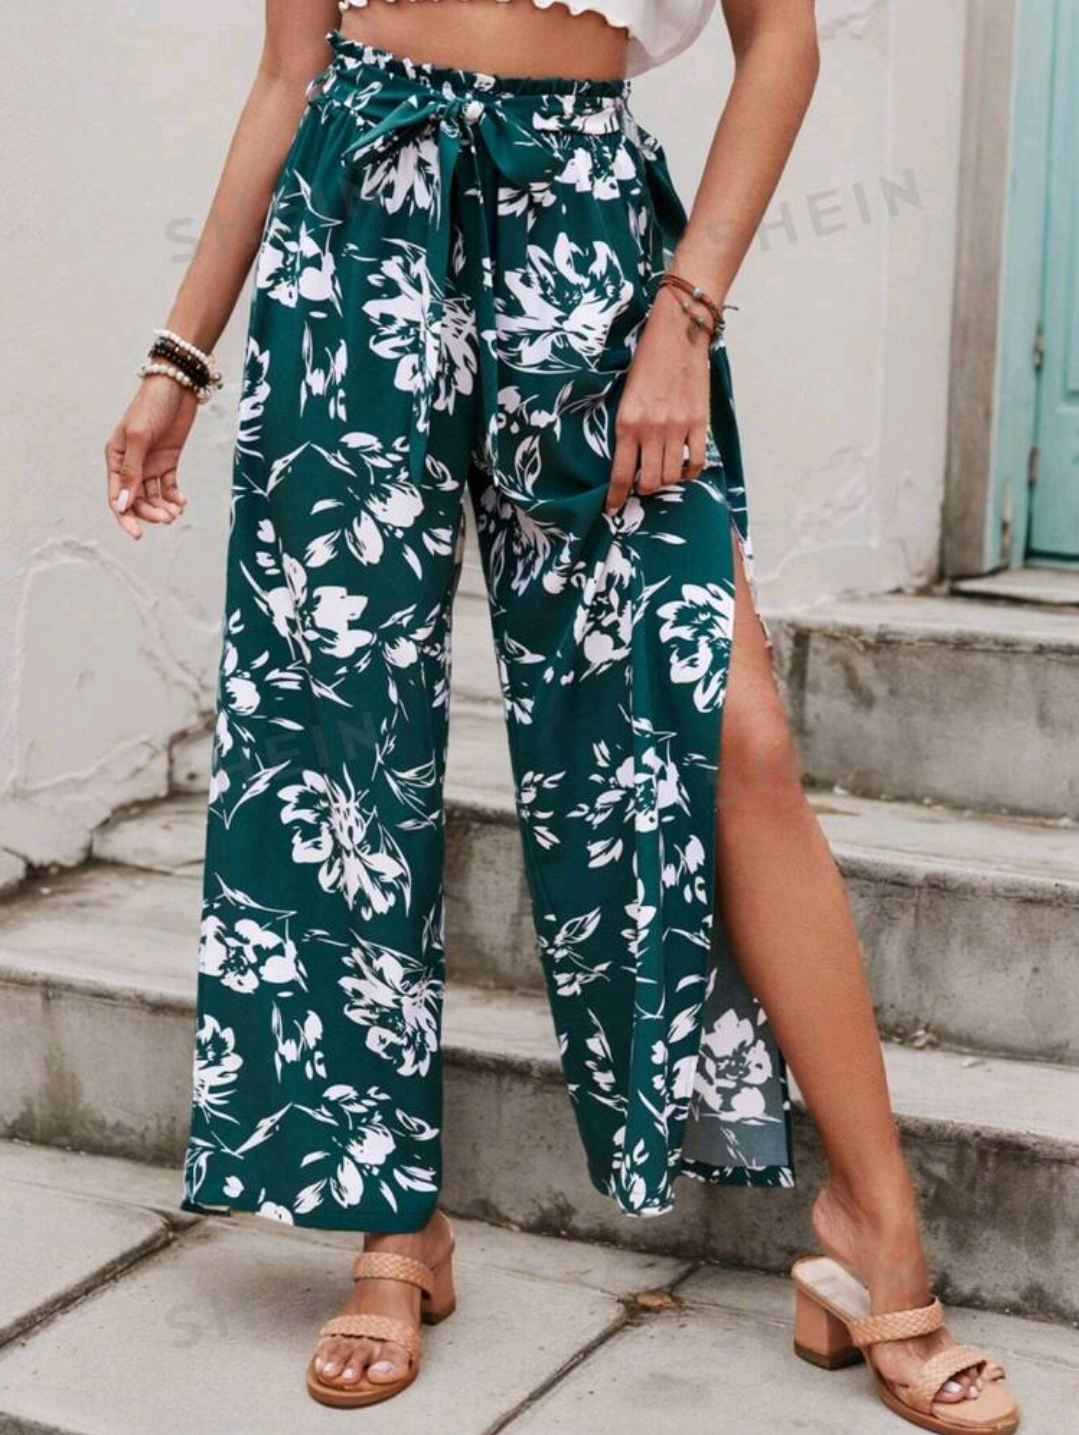 SHEIN Frenchy Green Beach Pants  Floral Print Paper Bag Waist Wide Leg Pants With Side Slit